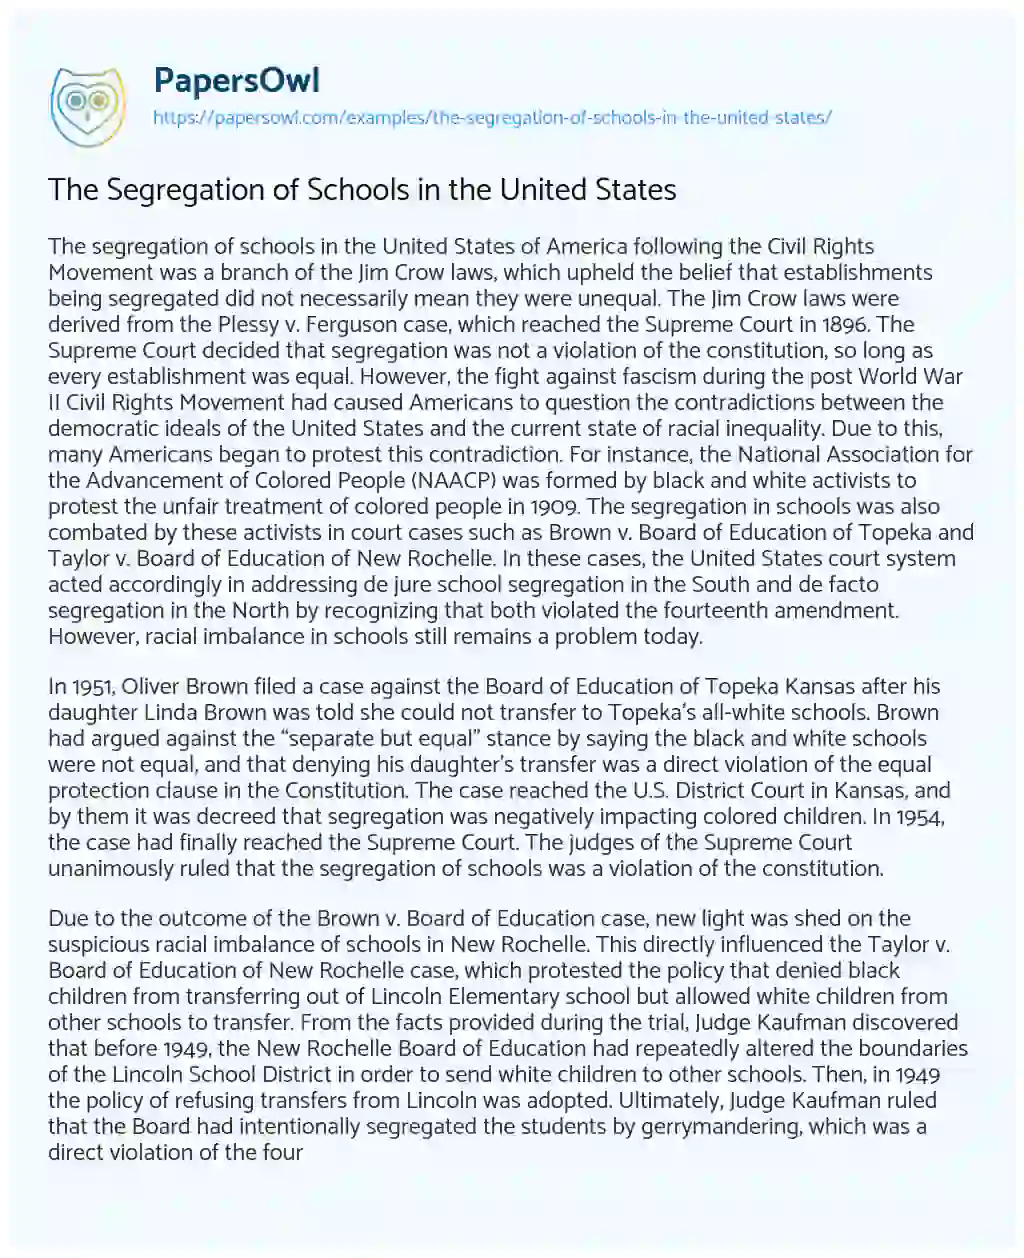 The Segregation of Schools in the United States essay